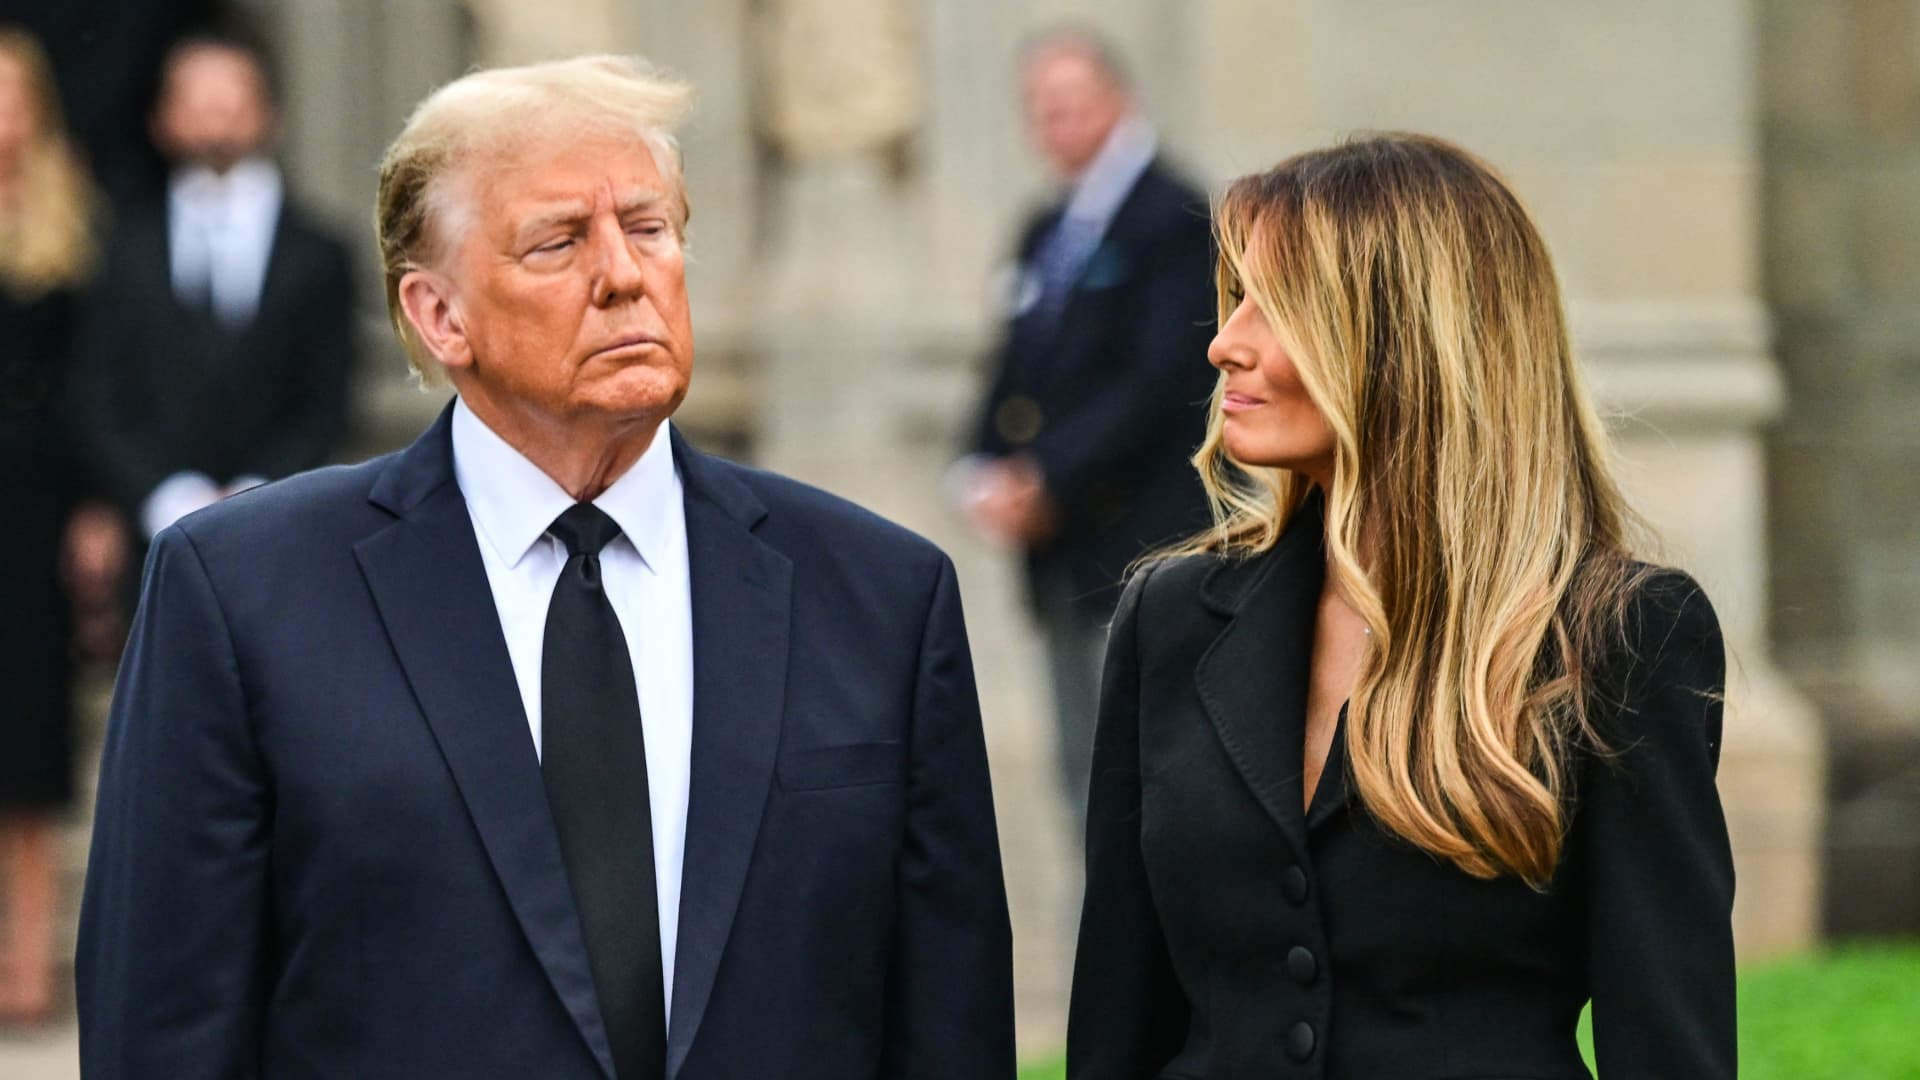 Former U.S. President Donald Trump stands with his wife Melania Trump as they depart the funeral for Amalija Knavs, the former first lady's mother, outside the Church of Bethesda by the Sea, in Palm Beach, Florida, on Jan. 18, 2024.